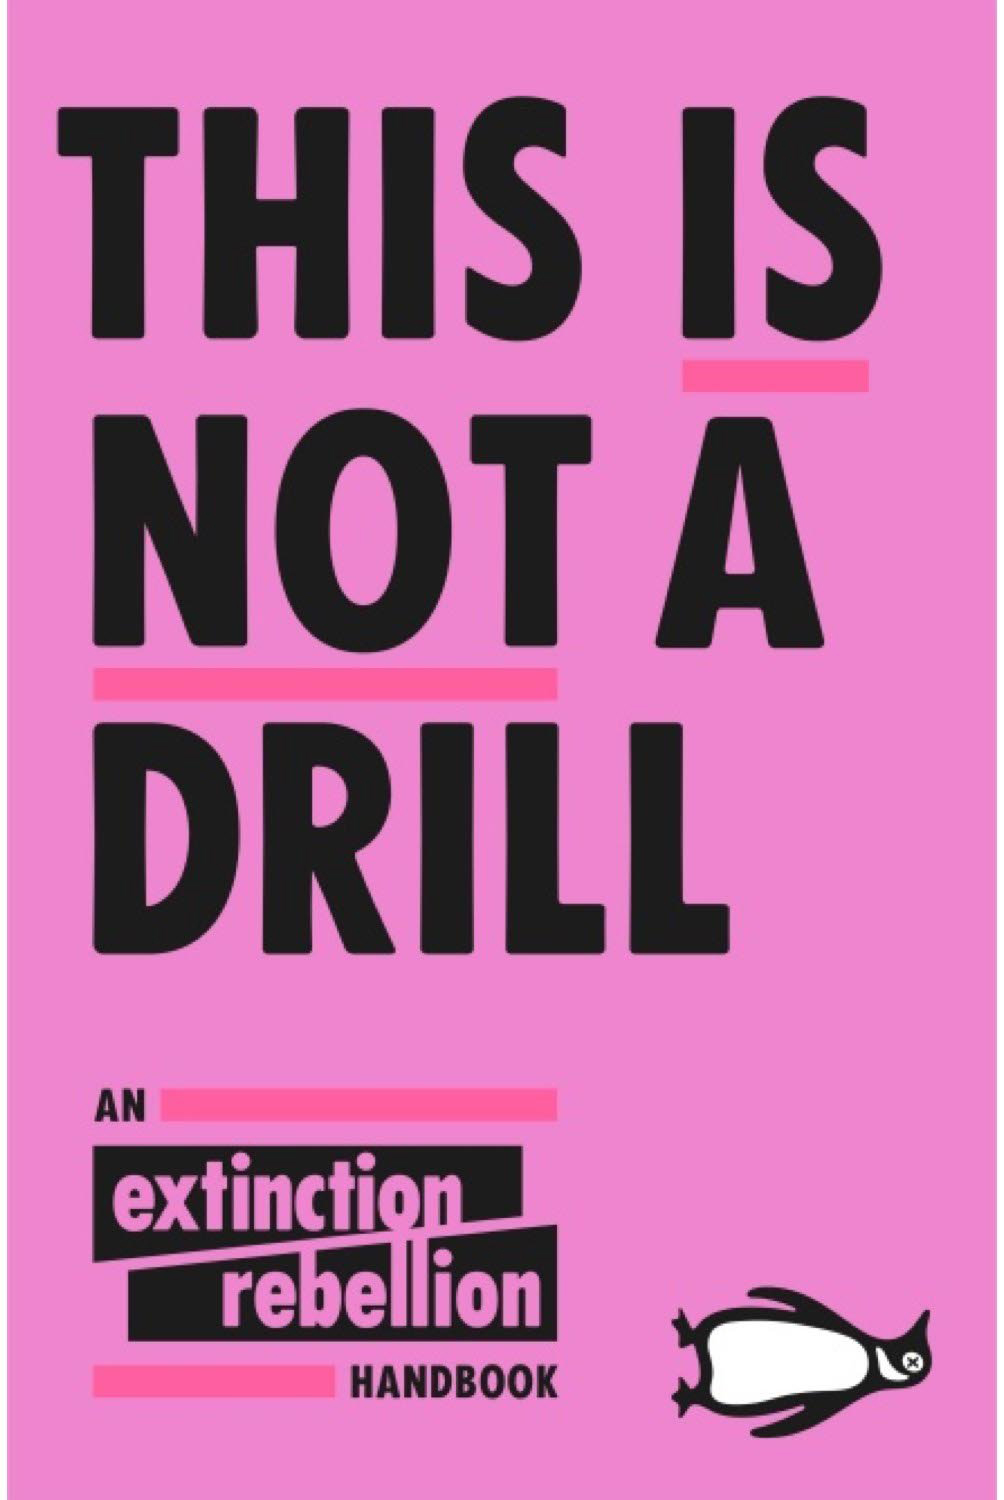 This is not a drill - Book cover